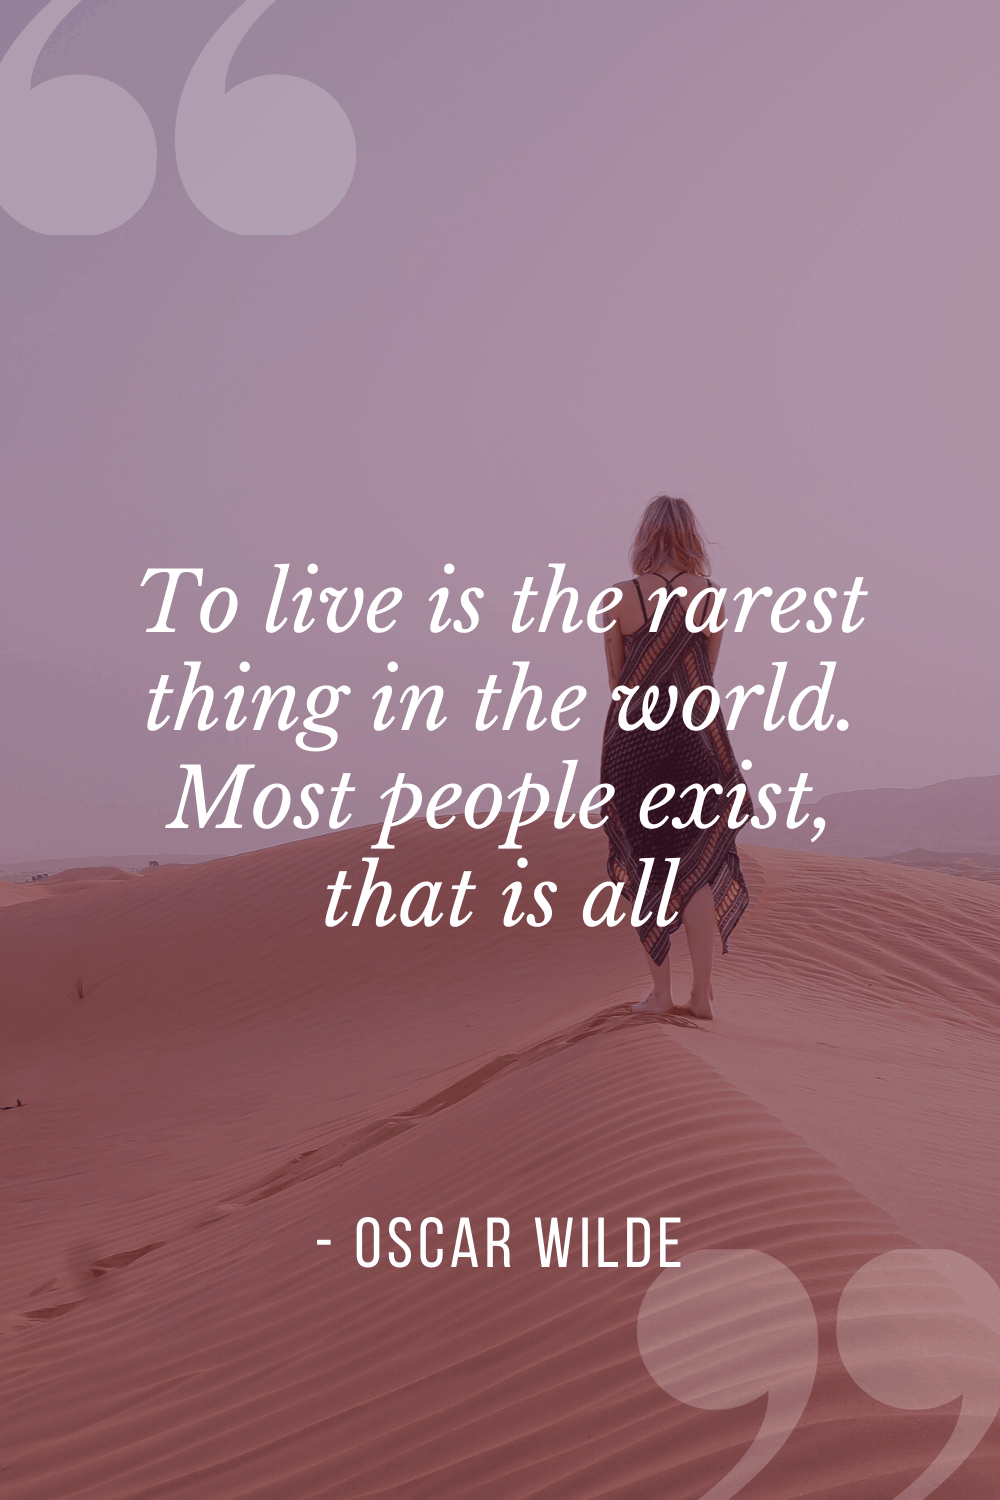 “To live is the rarest thing in the world. Most people exist, that is all”, Oscar Wilde